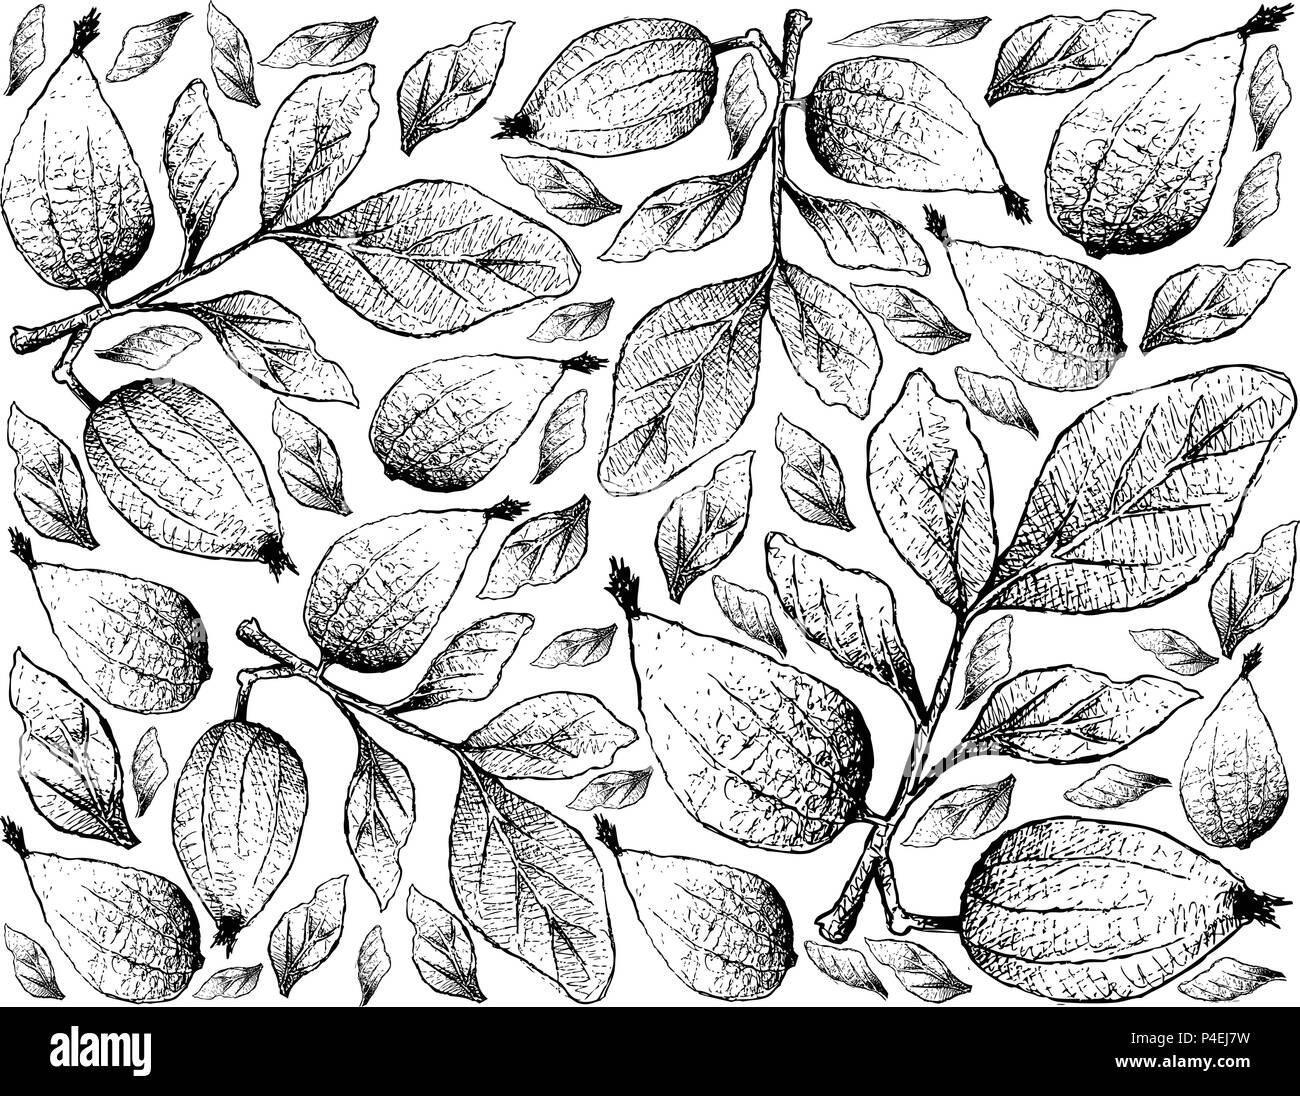 Tropical Fruit, Illustration Wallpaper of Hand Drawn Sketch Gardenia Erubescens Fruits Isolated on White Background. Stock Vector